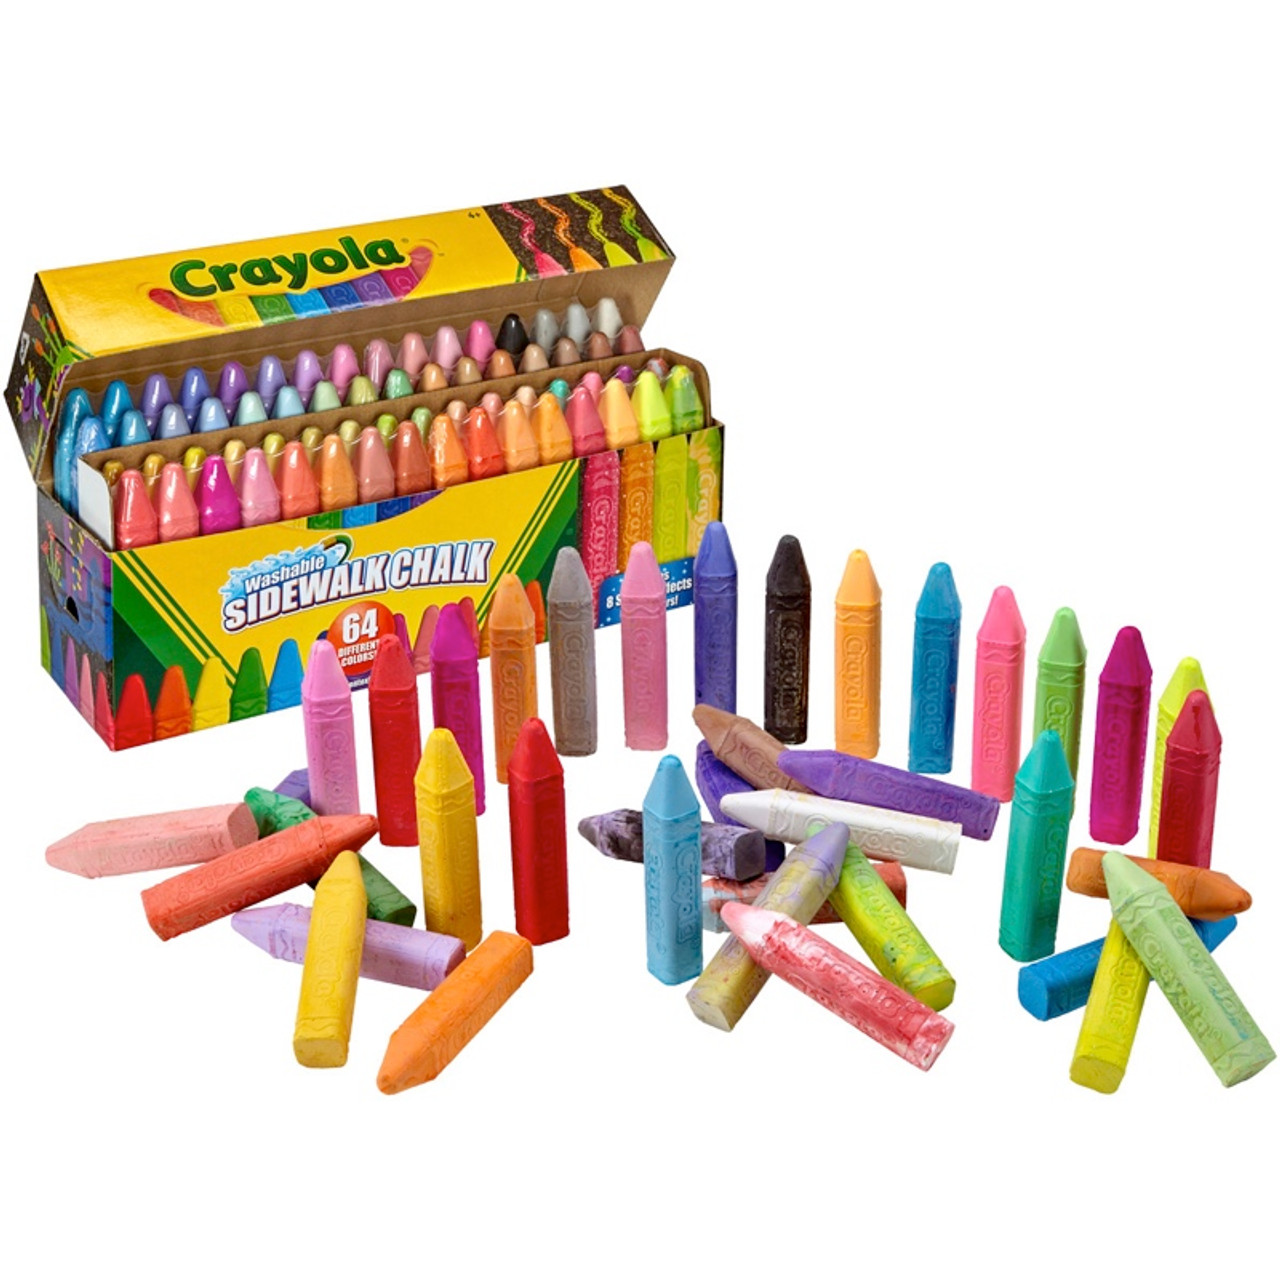 Crayola Washable Skinny Markers Pack of 64 set of 64 [PACK OF 2 ]